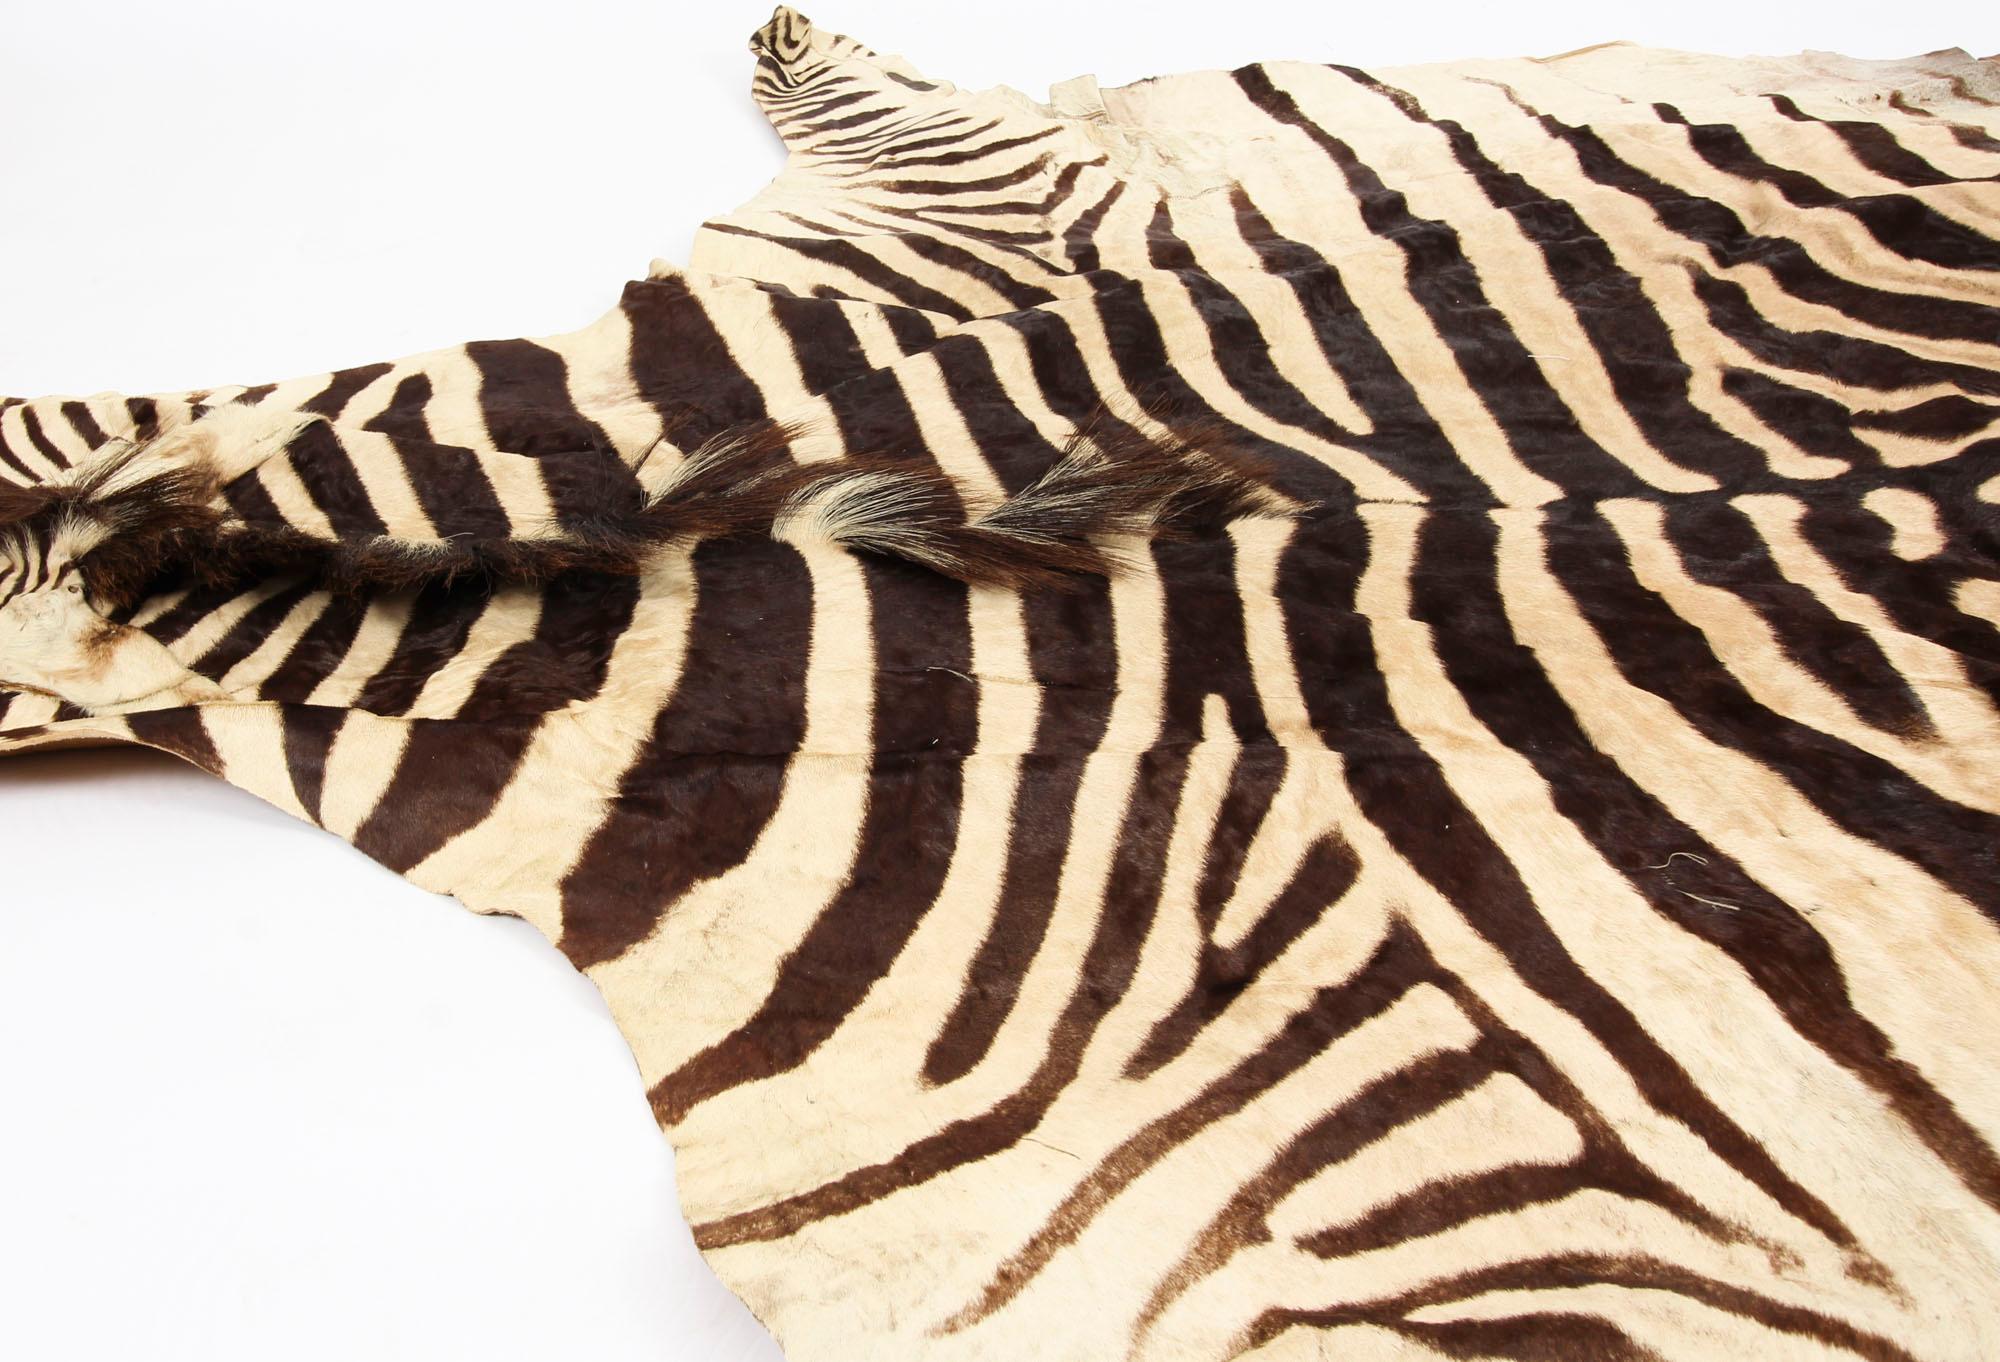 A lovely taxidermy Burchell's Zebra skin rug, circa 1970 in date.

Beautifully well marked striped zebra hide (Equus quagga burchelli), has a flat head.

Please note: as there are approximately 240,000 Burchill's Zebra in the wild, this species